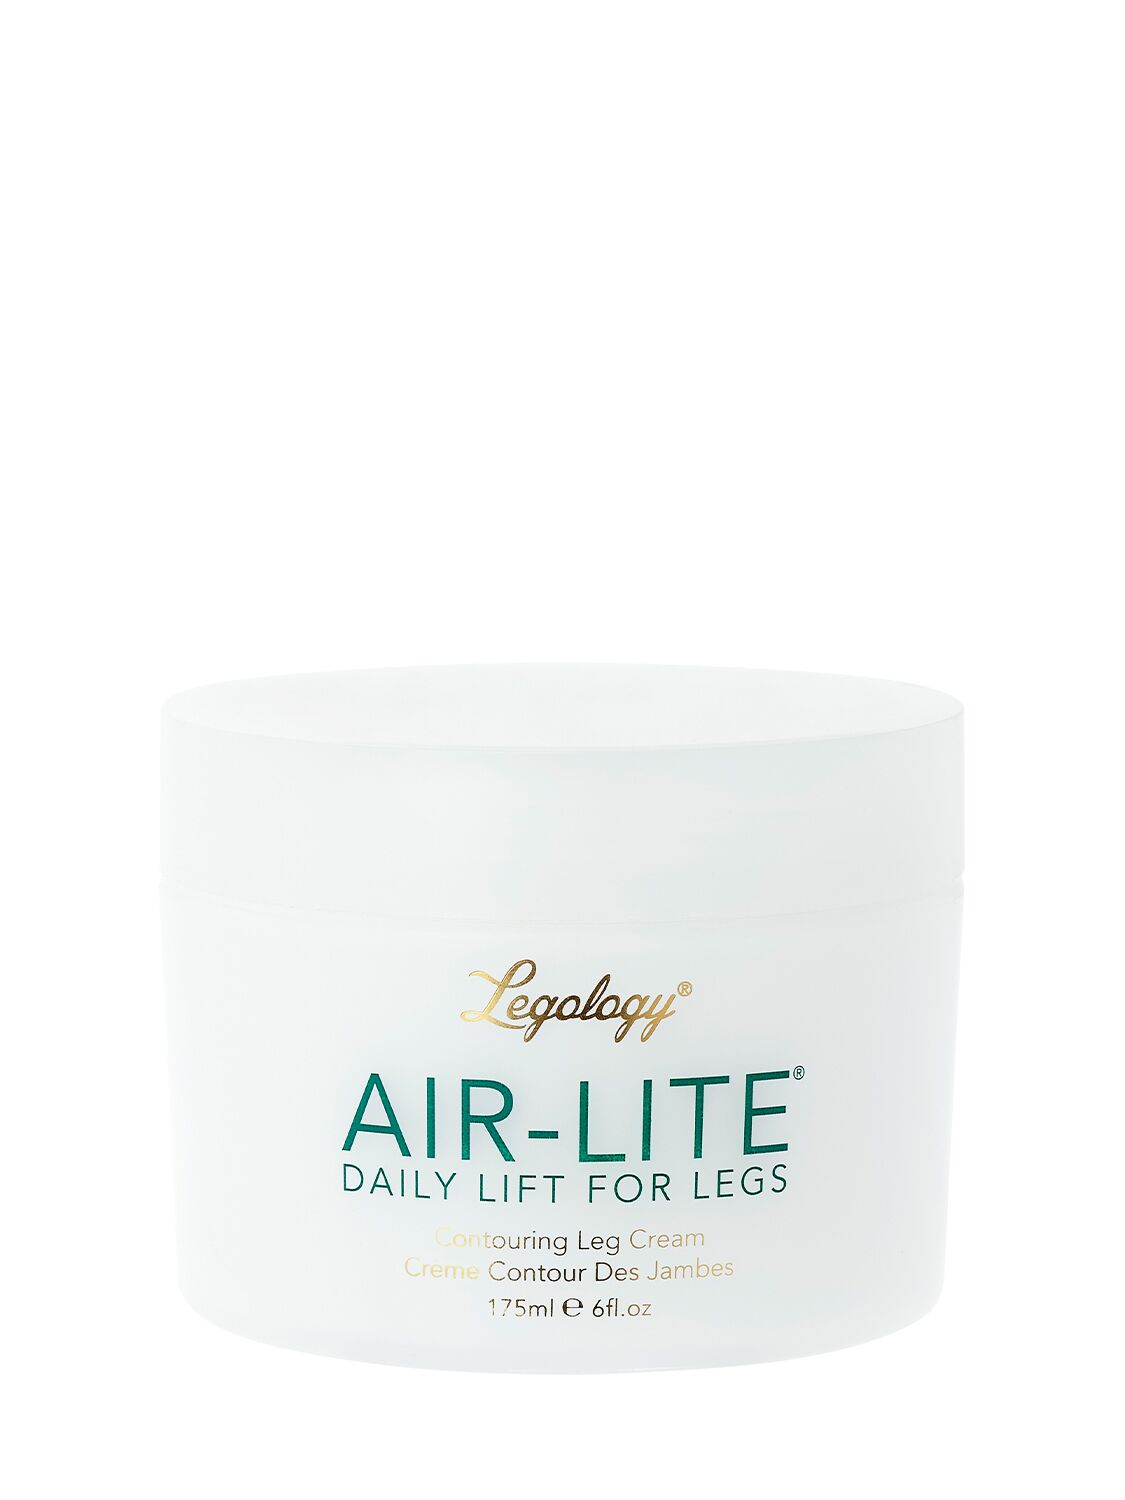 Image of 175ml Air-lite Daily Lift For Legs